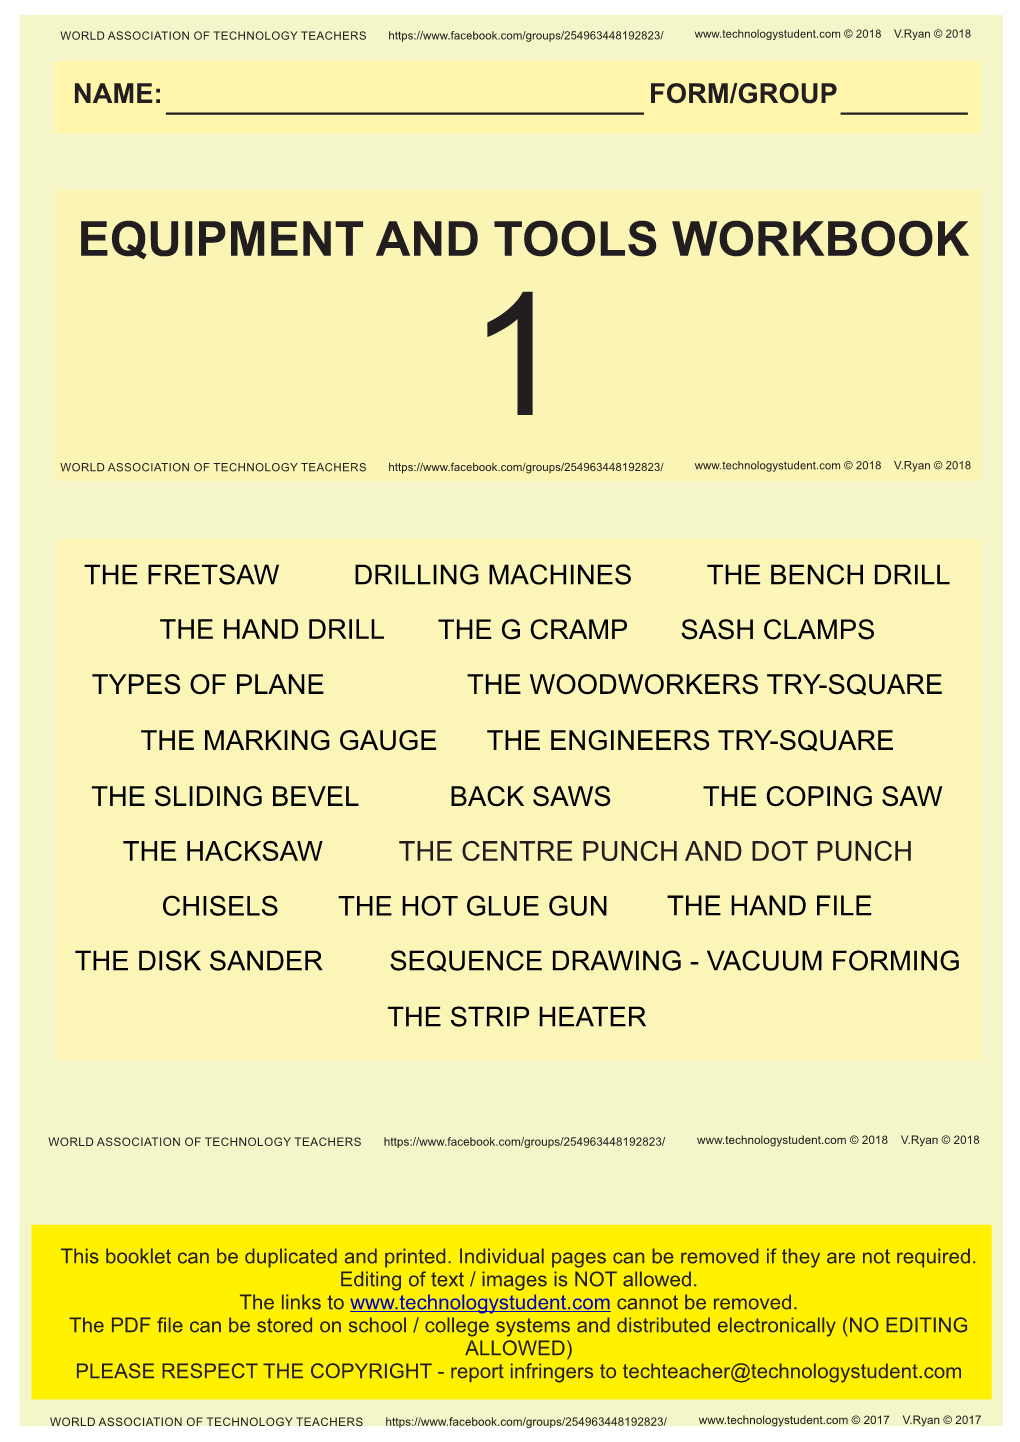 Equipment and Tools Workbook